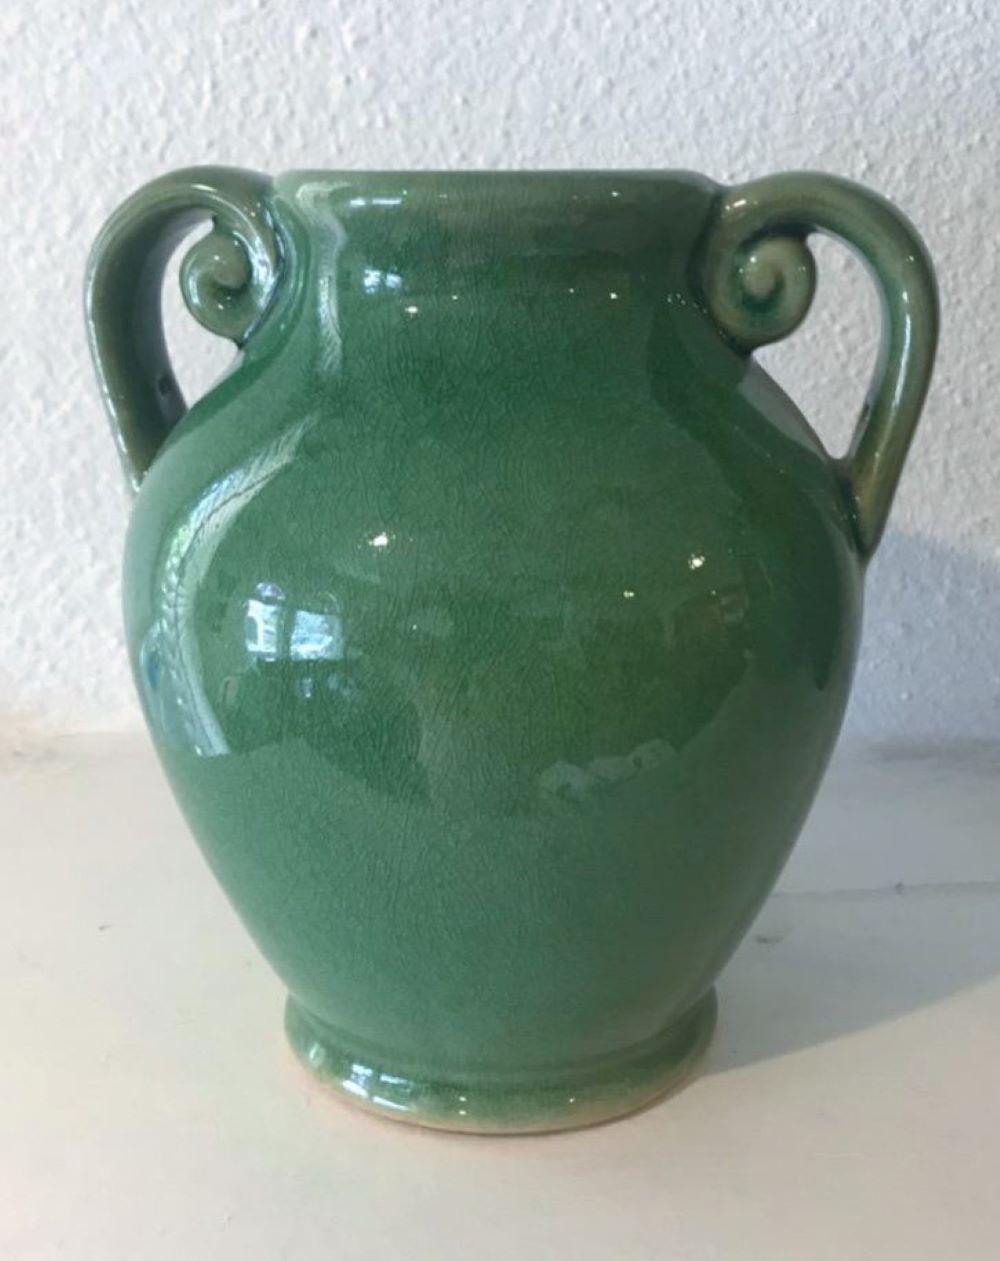 These fantastic green pottery vases are in pristine condition and came from a private collection. Great color and presence.
measures: Small 4.5 wide x 6 high
Med. 7 wide x 7 high
Large 8 wide x 12 high.